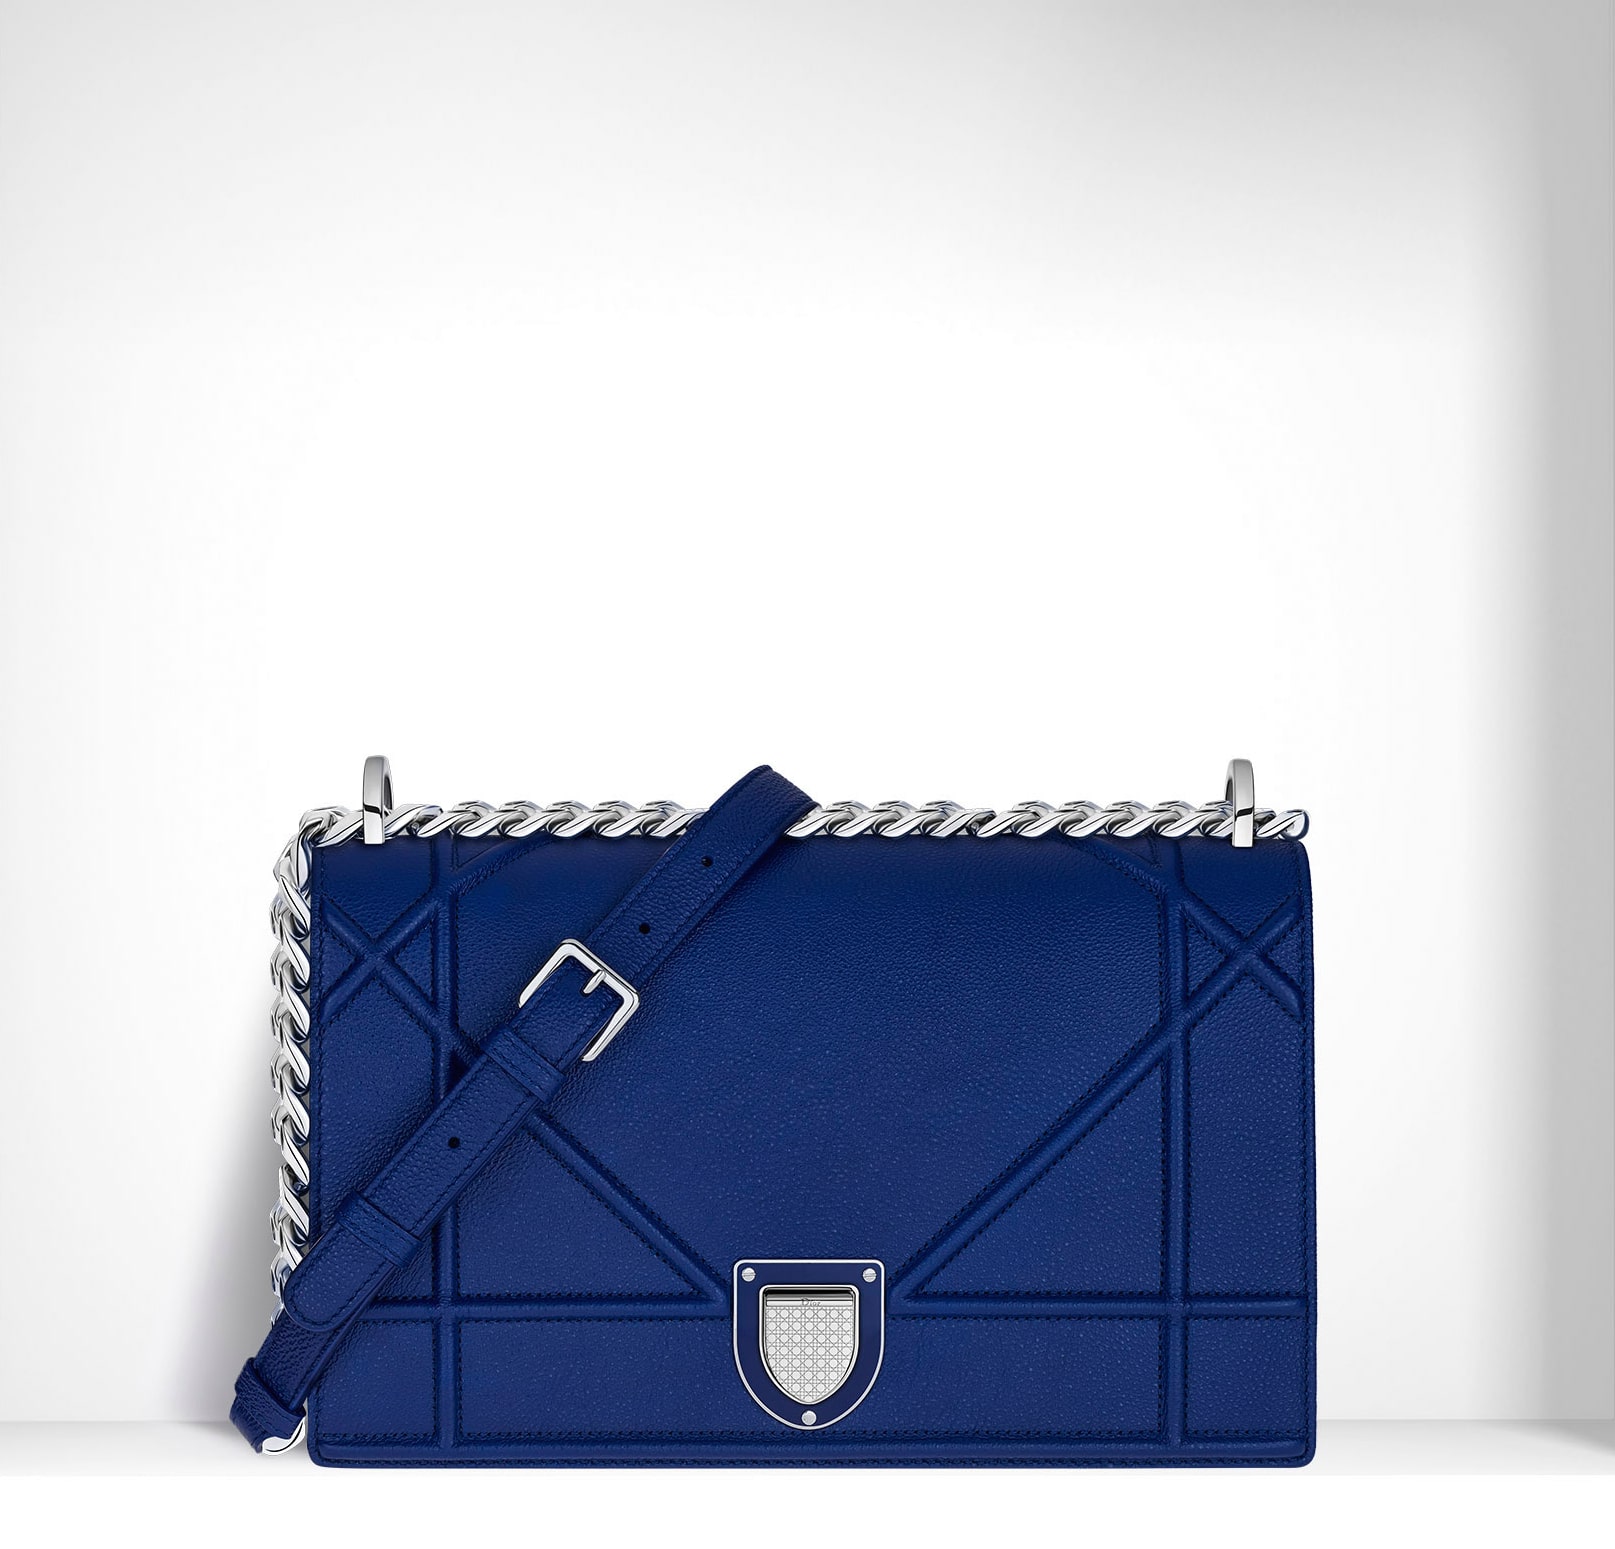 More Dior Fall / Winter 2015 Bags and Europe Price Increase on Diorama – Spotted Fashion